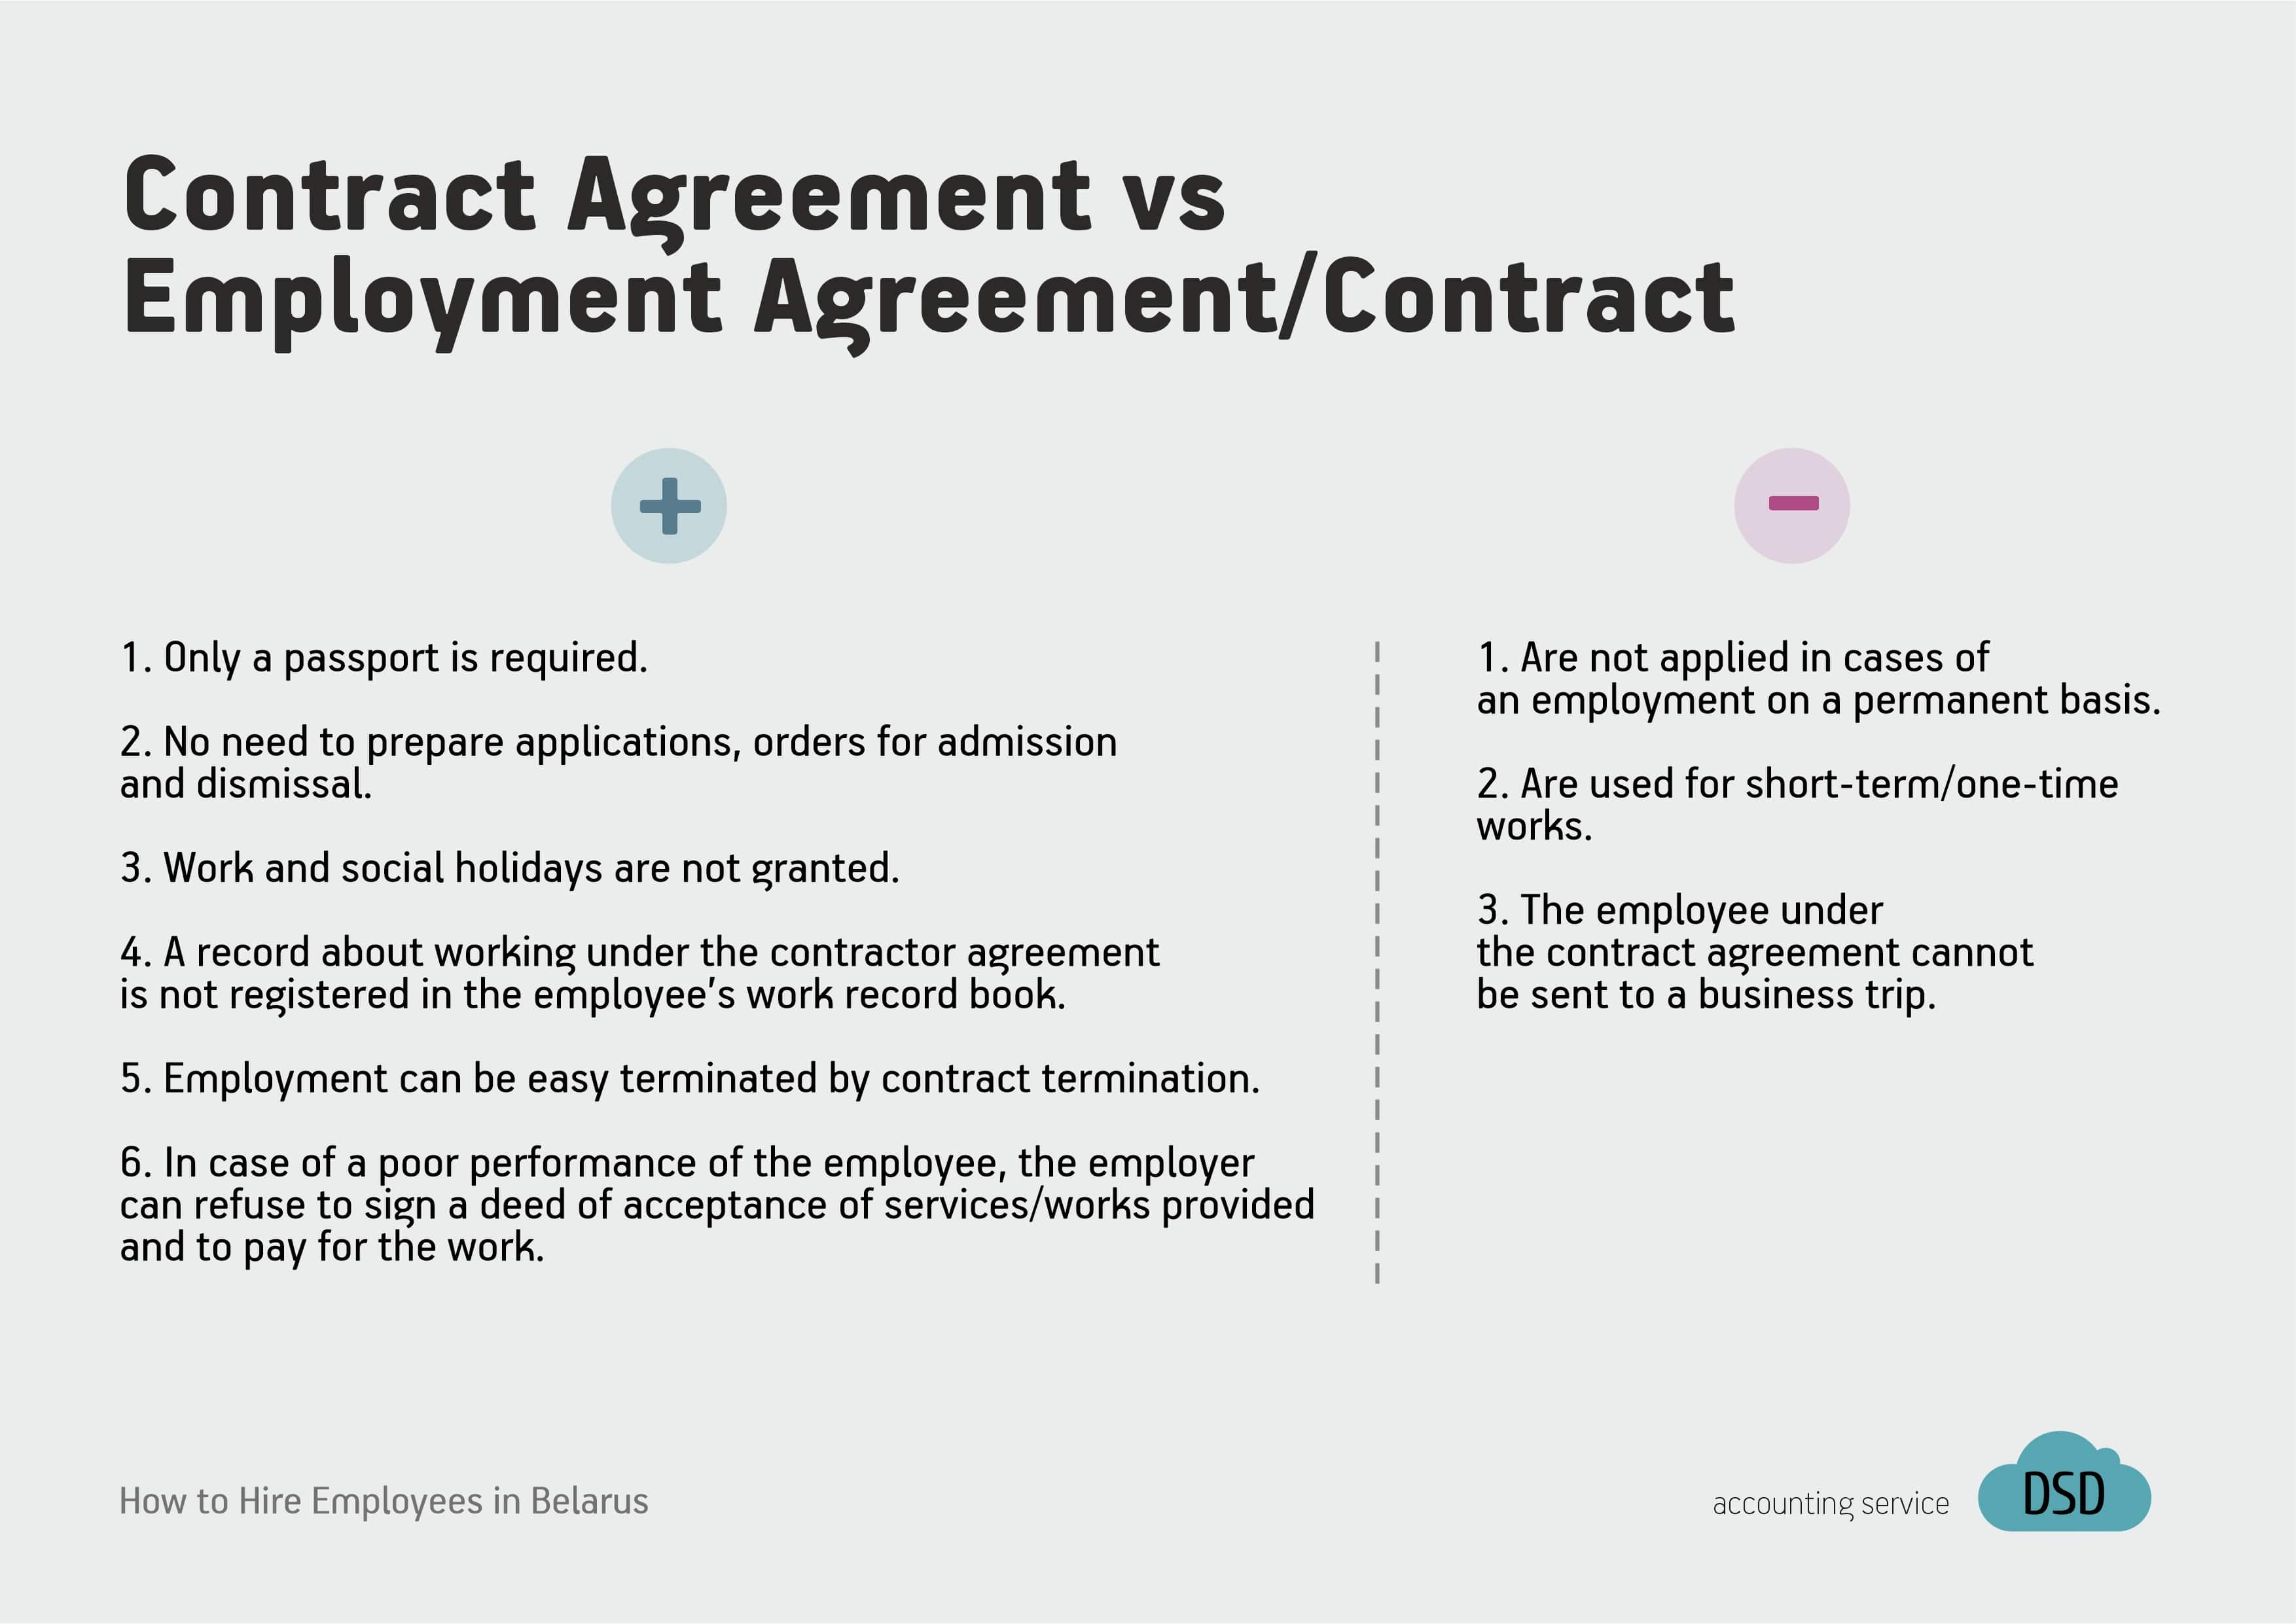 Contract agreement vs employment agreement